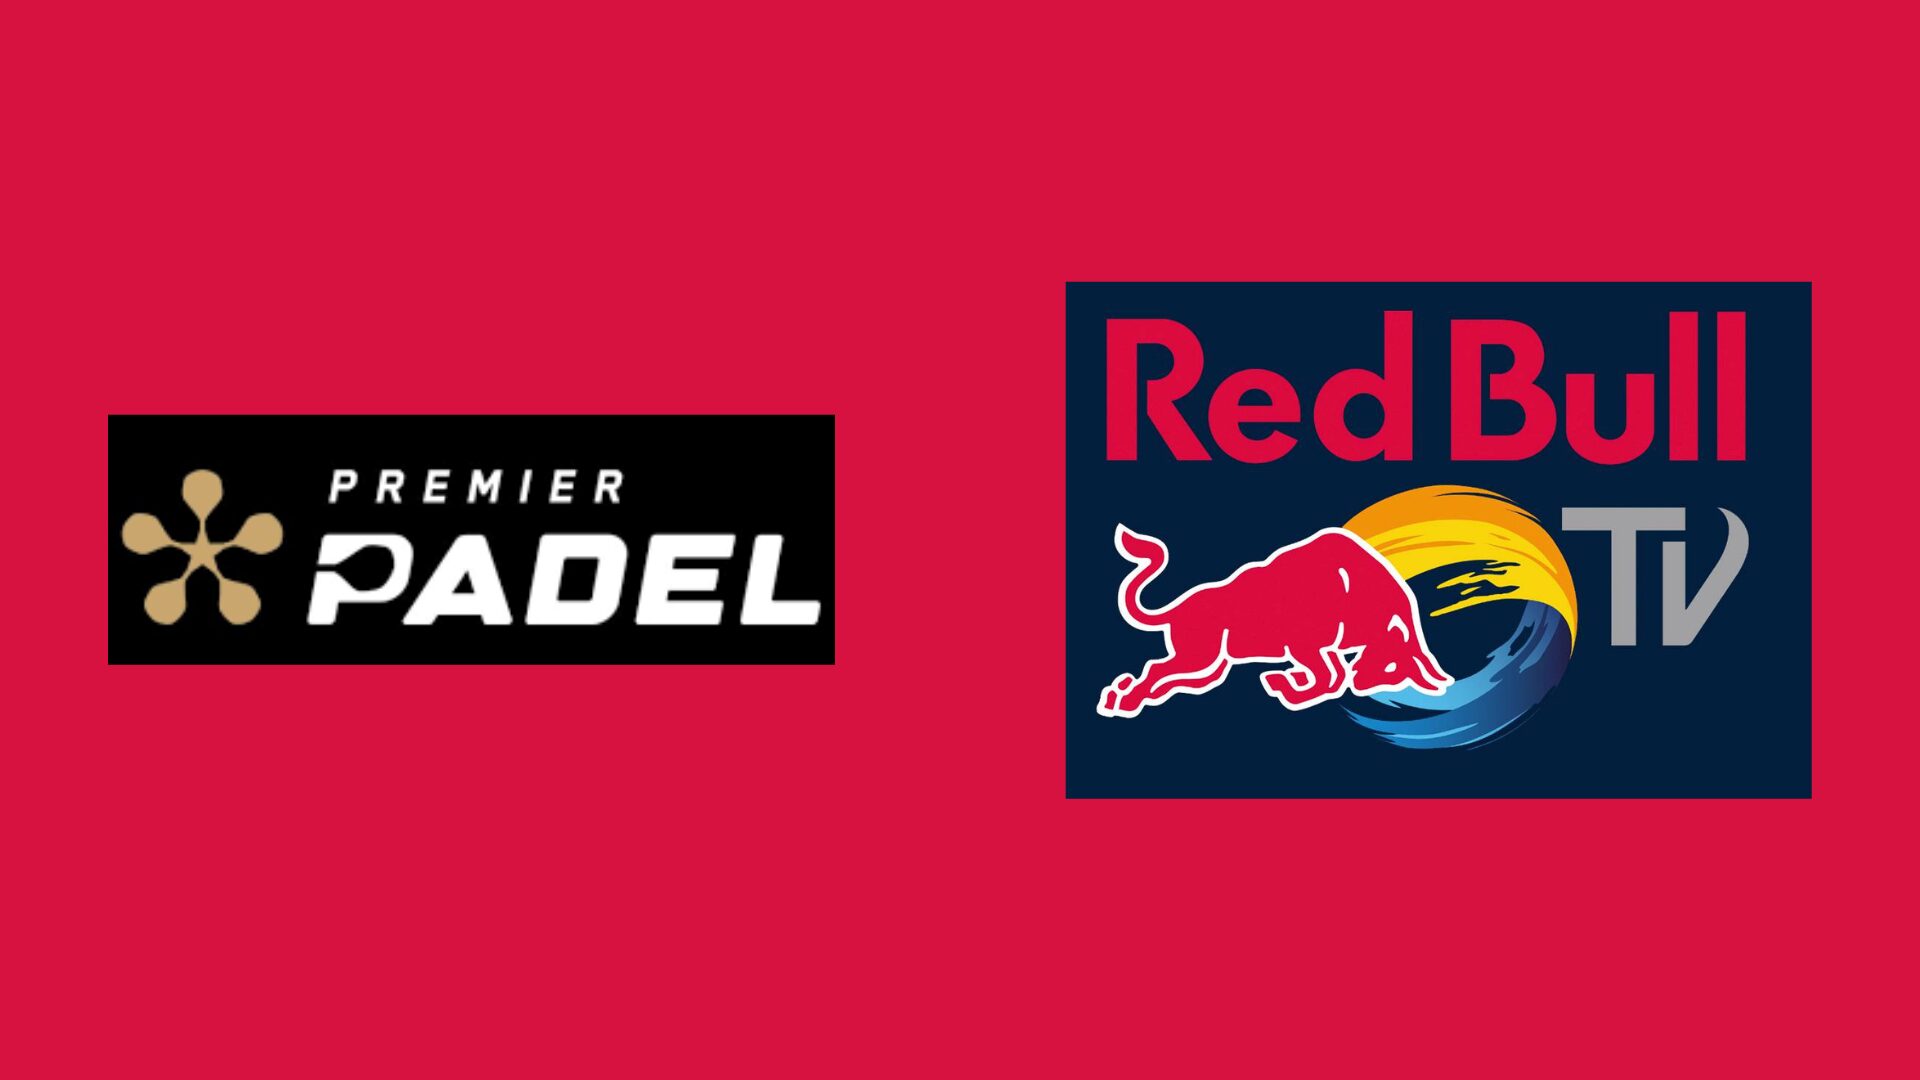 A partnership between Premier Padel and Red Bull TV for broadcasting the matches!